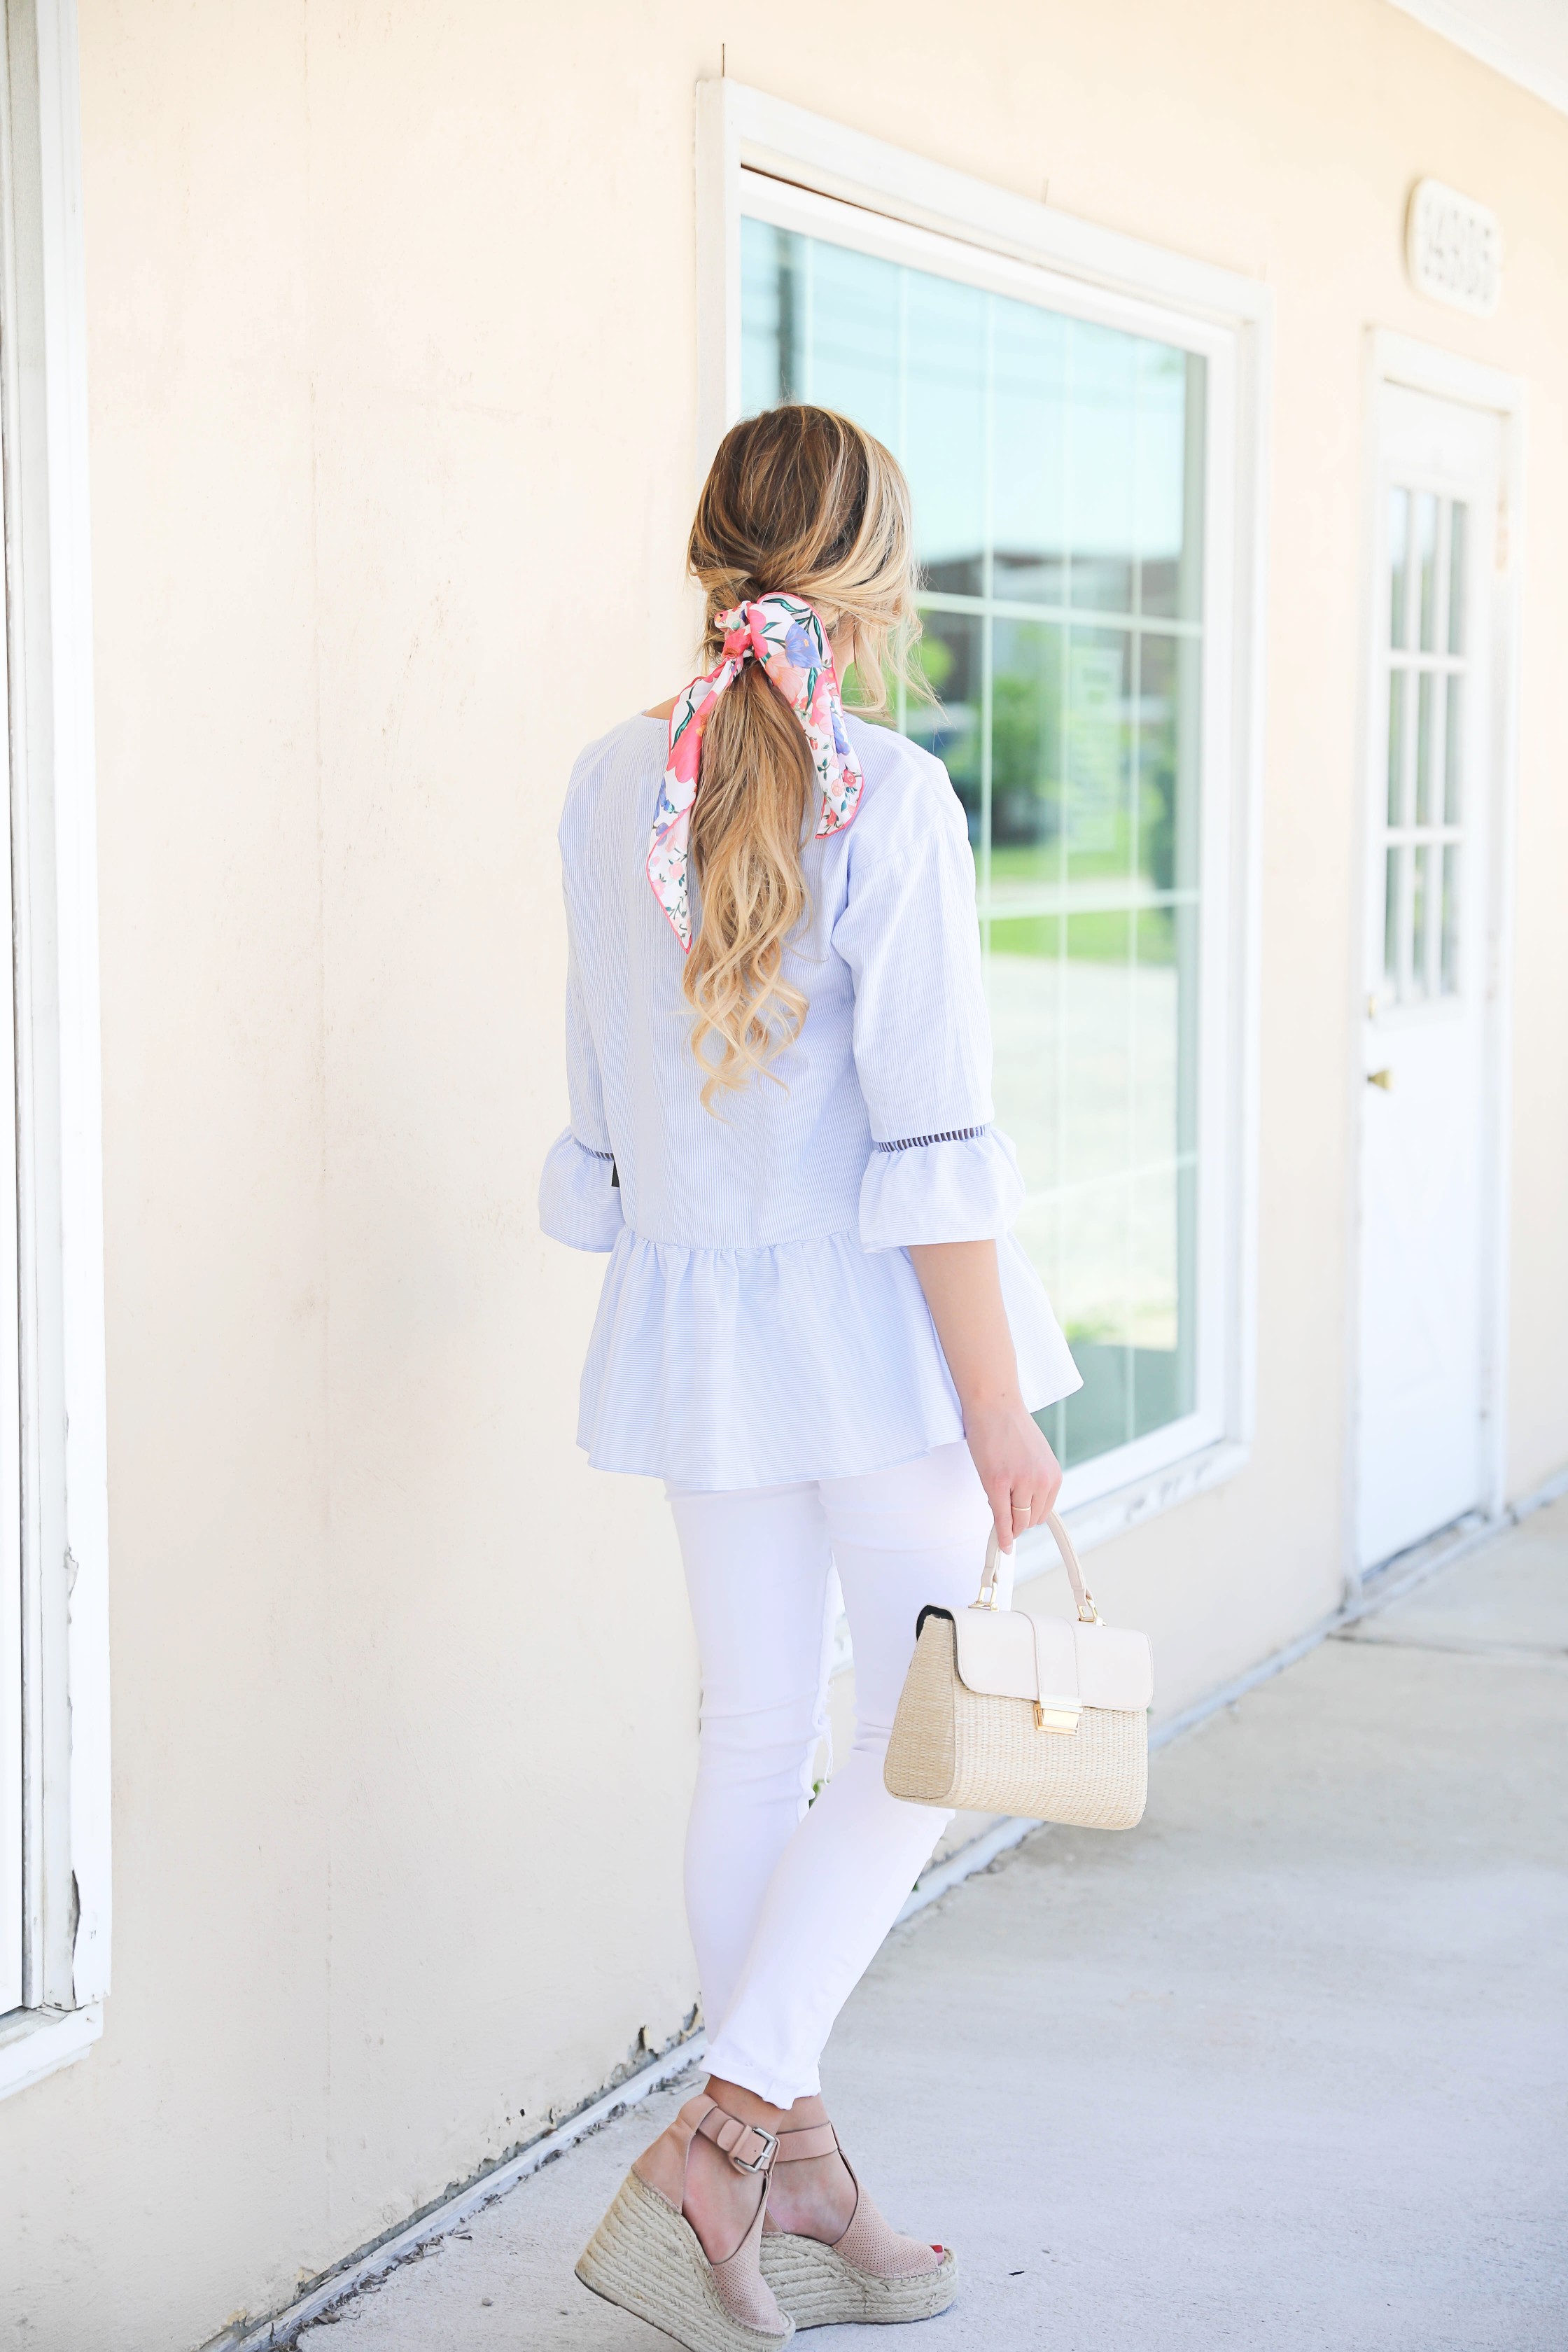 Seersucker peplum top from the Blue Door Boutique paired with white jeans and cute wedges! I love this preppy look, this kate spade silk scarf I super in for spring! I love this spring outfit! Silk scarf hairstyle idea! I love scarves and ponytails on fashion blog daily dose of charm by lauren lindmark